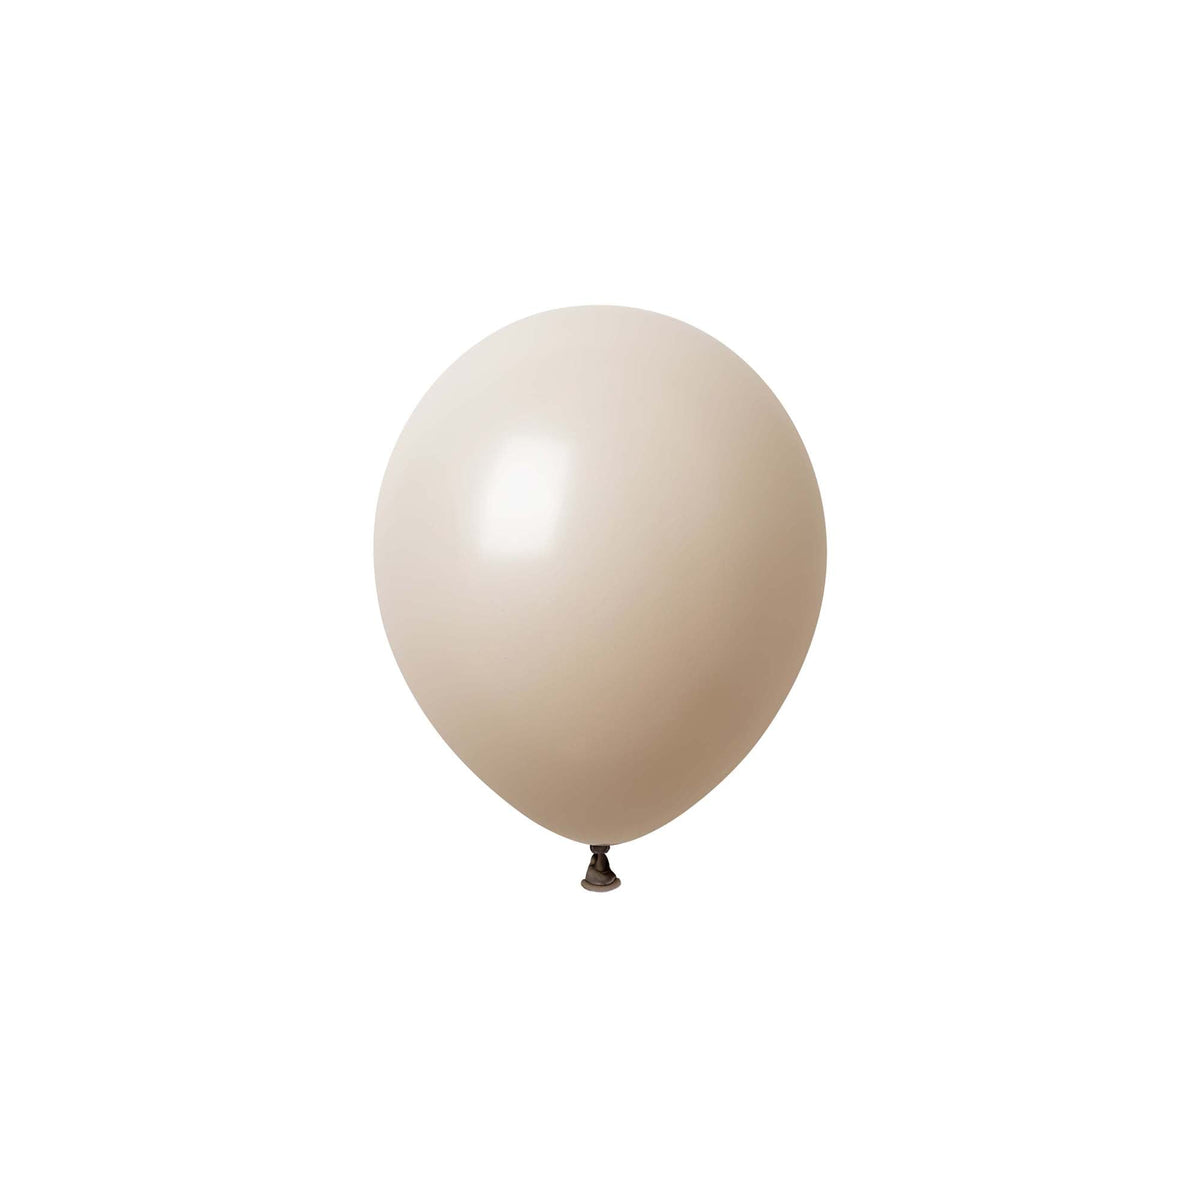 WIDE OCEAN INTERNATIONAL TRADE BEIJING CO., LTD Balloons White Sand Latex Balloons, 5 Inches, 100 Count 810077659700